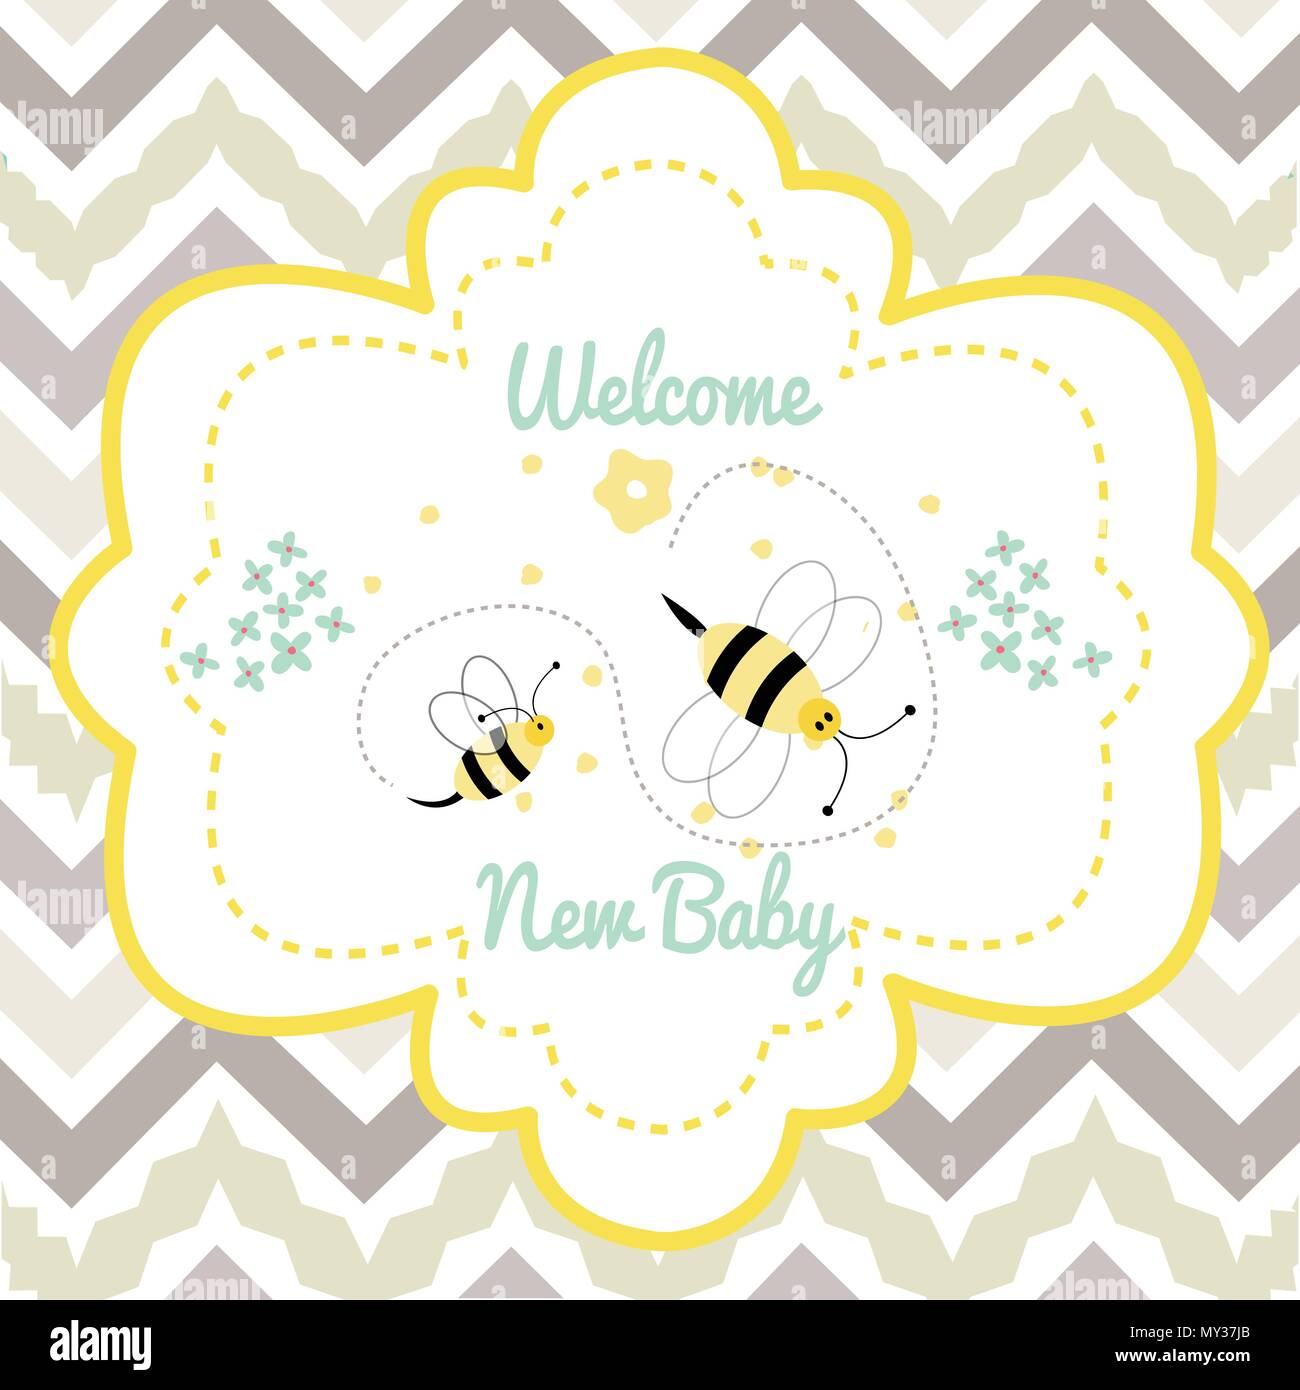 New baby arrival baby shower Stock Vector